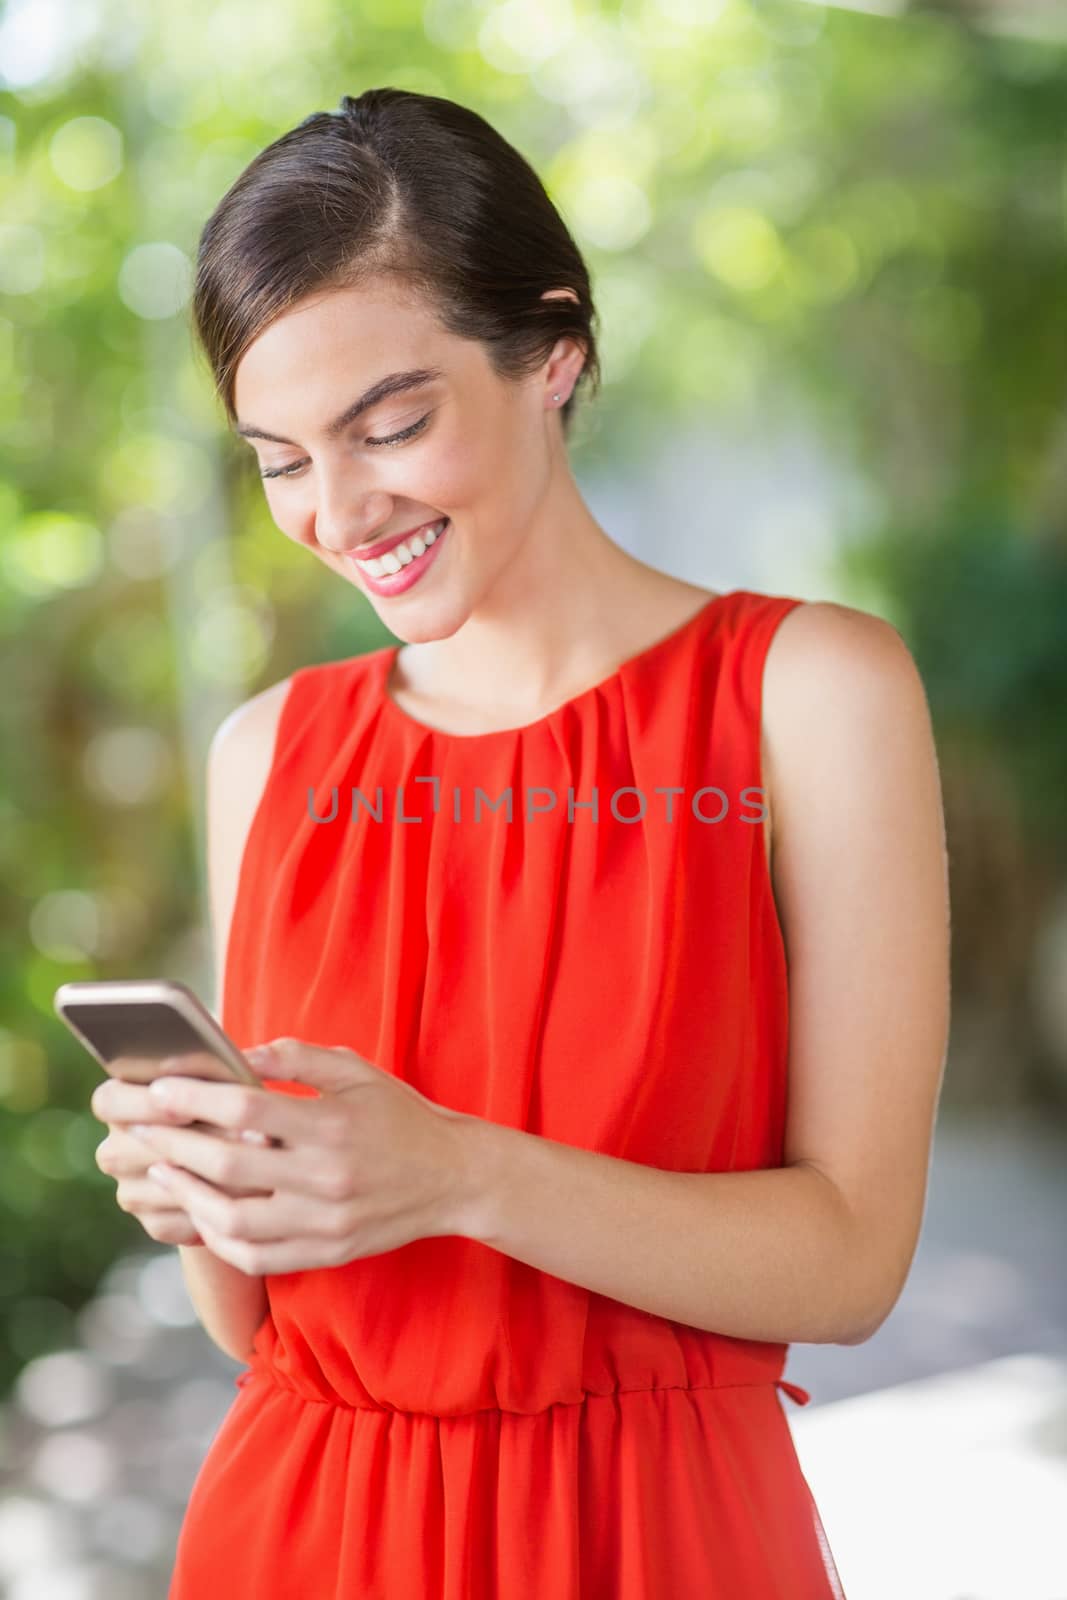 Beautiful woman smiling while using mobile phone